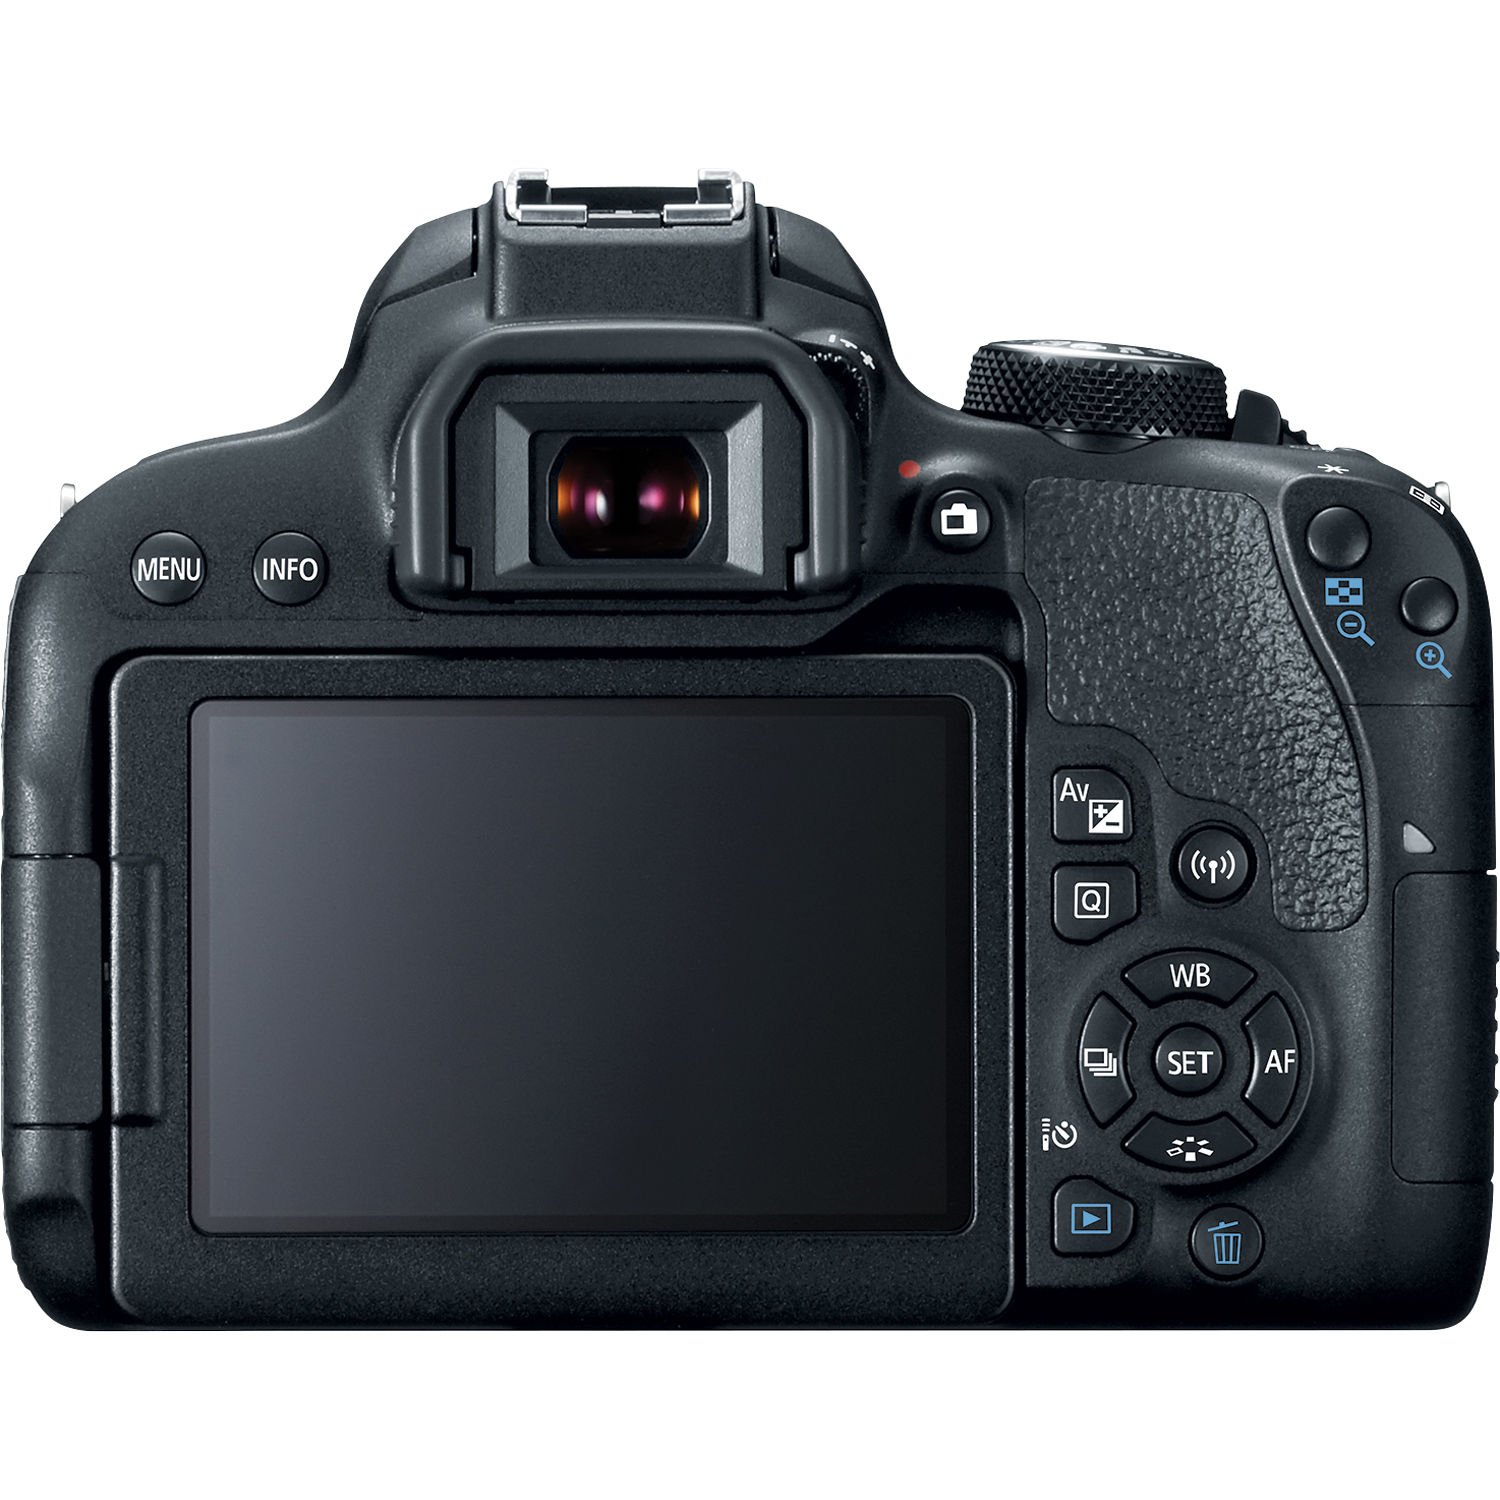 Canon EOS Rebel 800D / T7i DSLR Camera (Body Only) + 64GB Memory Card + Case + Corel Photo Software + 2 x LPE17 Battery + Card Reader + LED Light + Flex Tripod + More (Renewed)